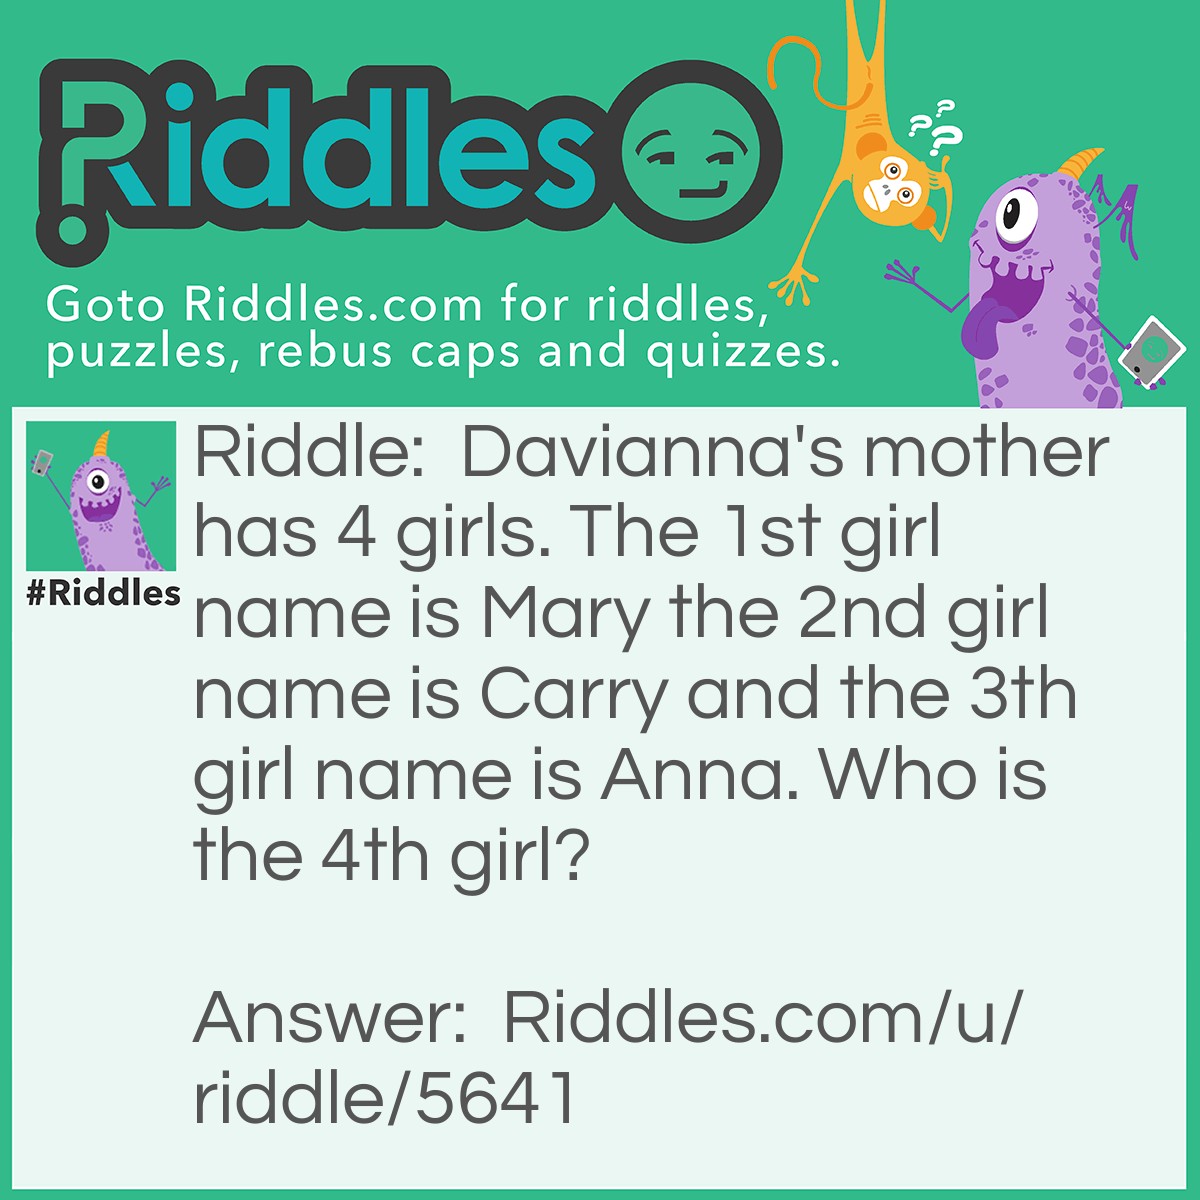 Riddle: Davianna's mother has 4 girls. The 1st girl name is Mary the 2nd girl name is Carry and the 3th girl name is Anna. Who is the 4th girl? Answer: The 4th girl is Davianna!